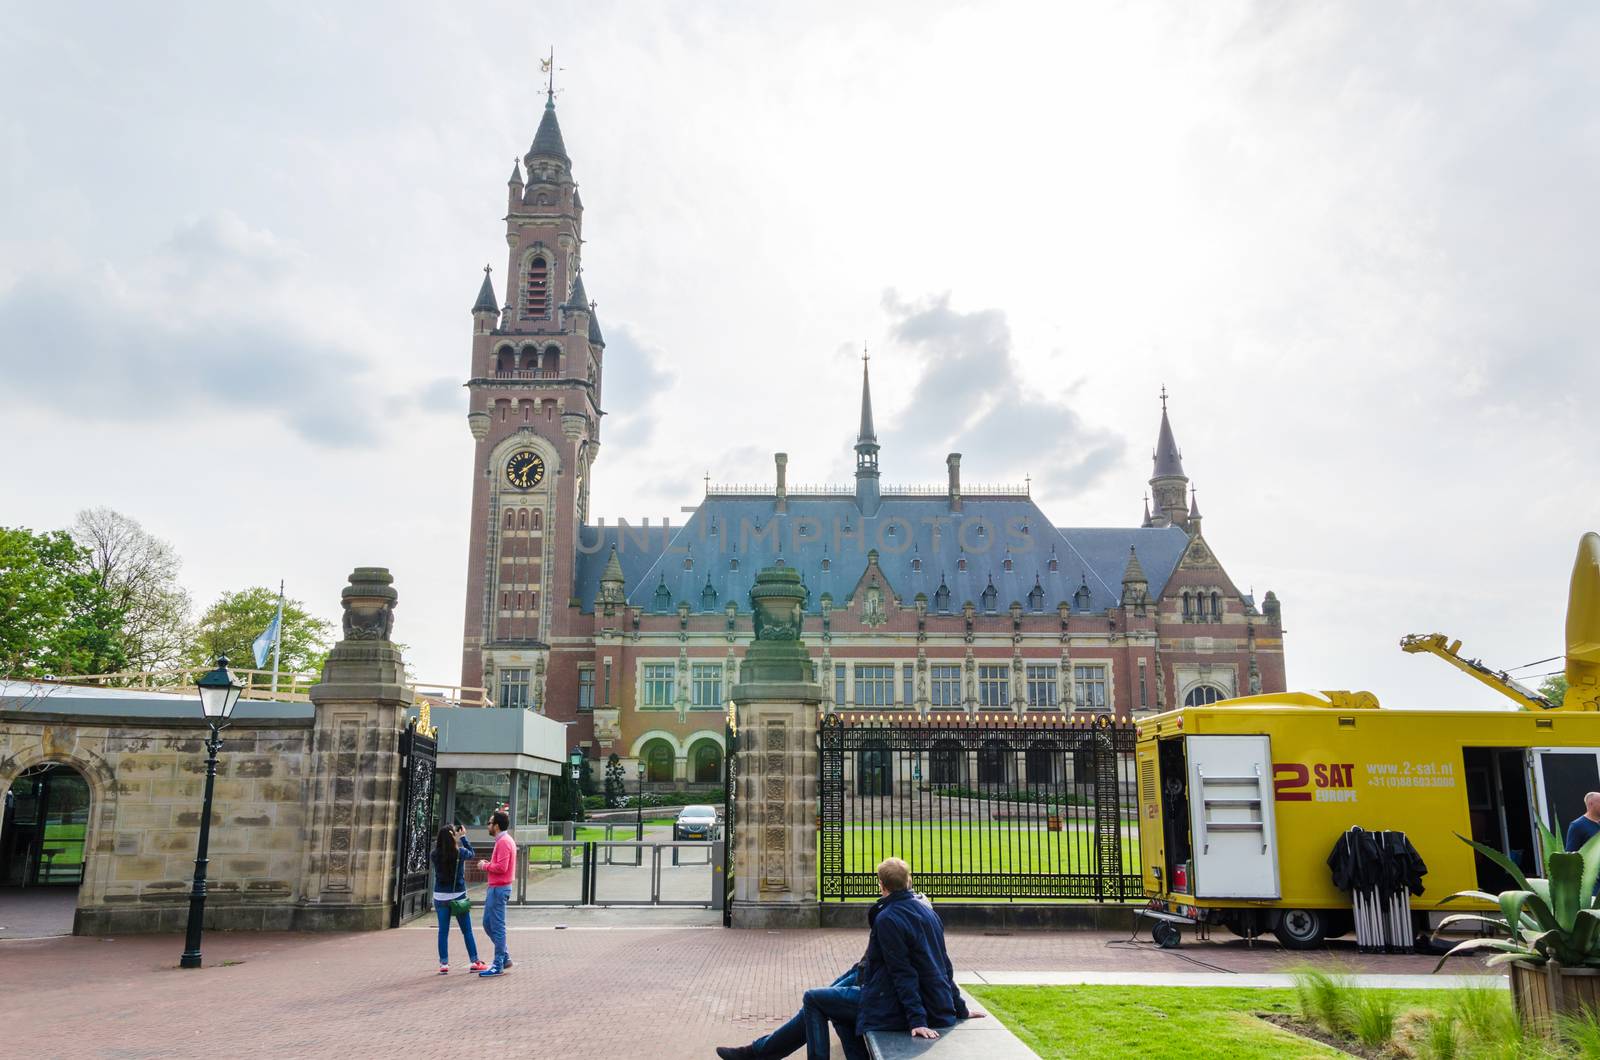 The Hague, Netherlands - May 8, 2015: Reporters at The Peace Palace in The Hague, Netherlands. It is often called the seat of international law because it houses the International Court of Justice.